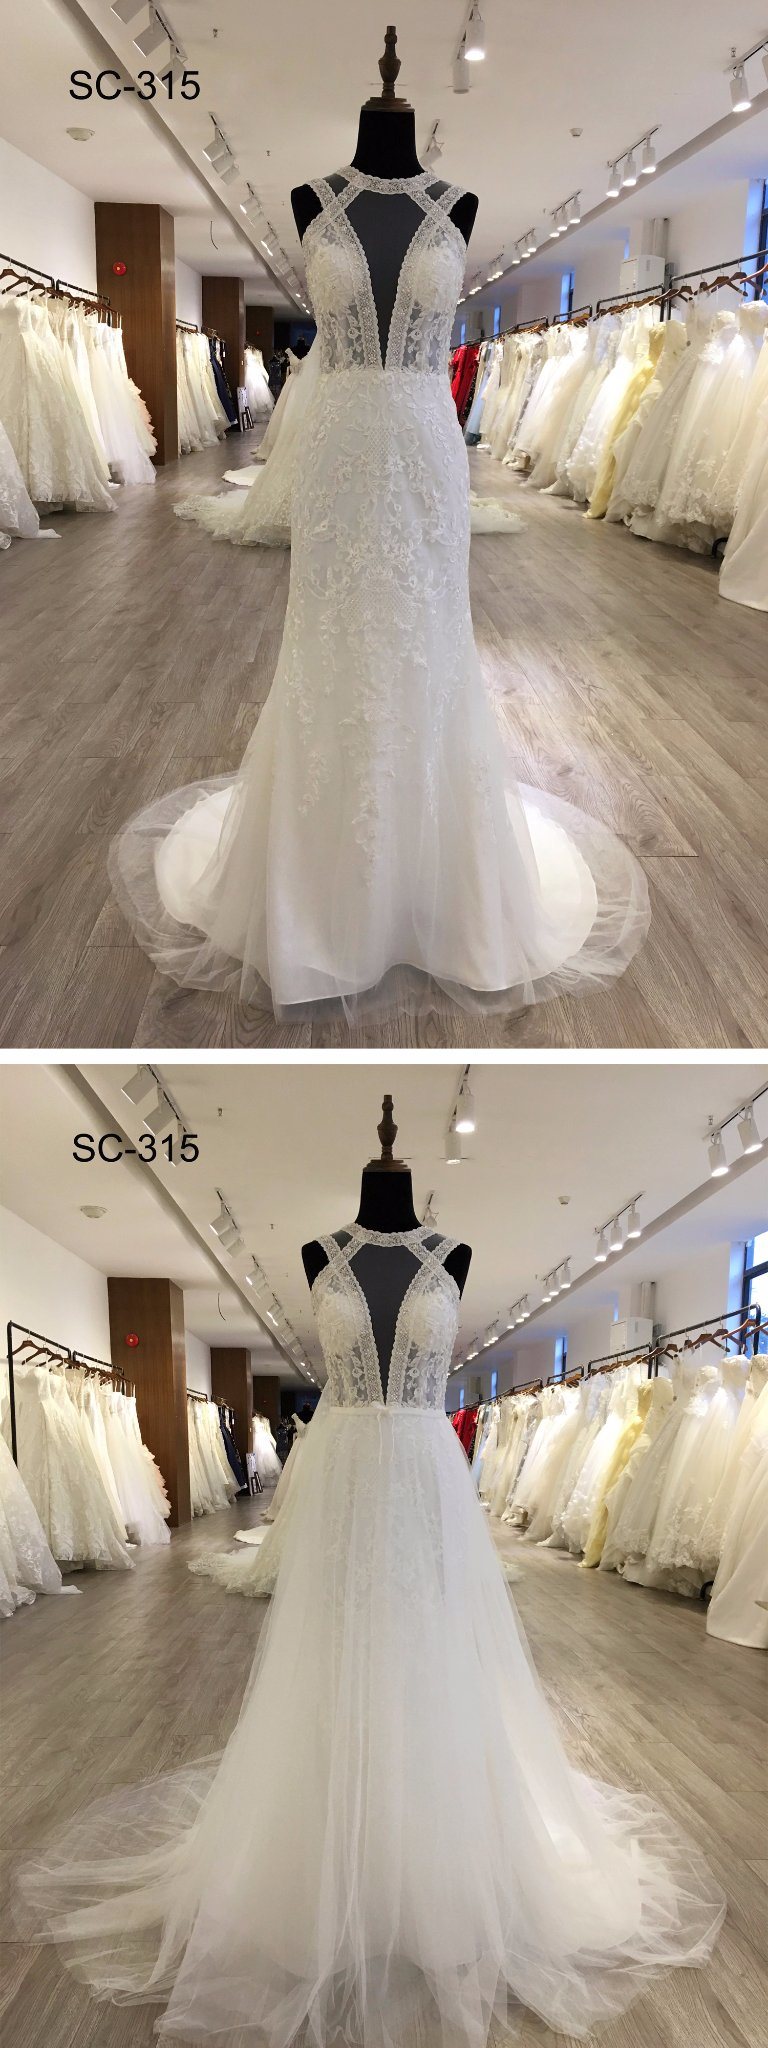 New Arrival Wedding Dress 2018 Bridal Gown